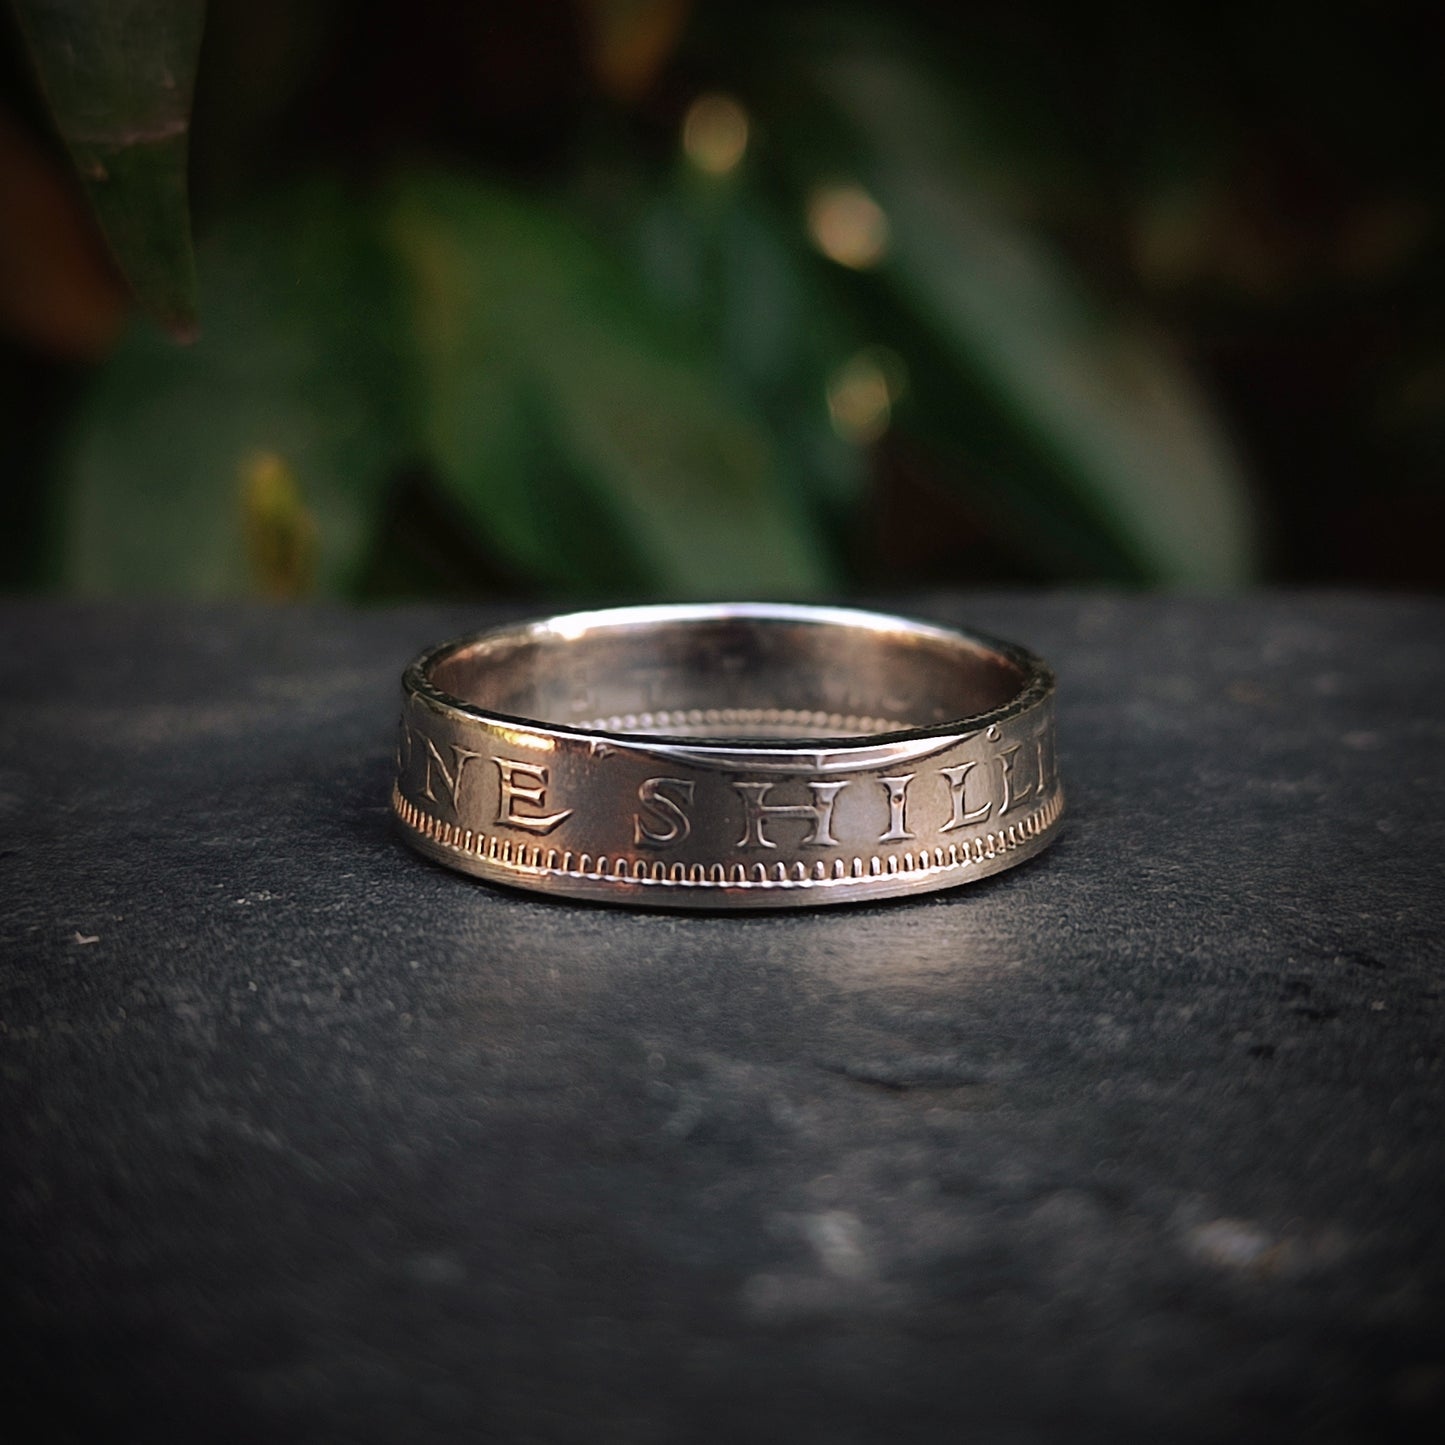 One Shilling Ring